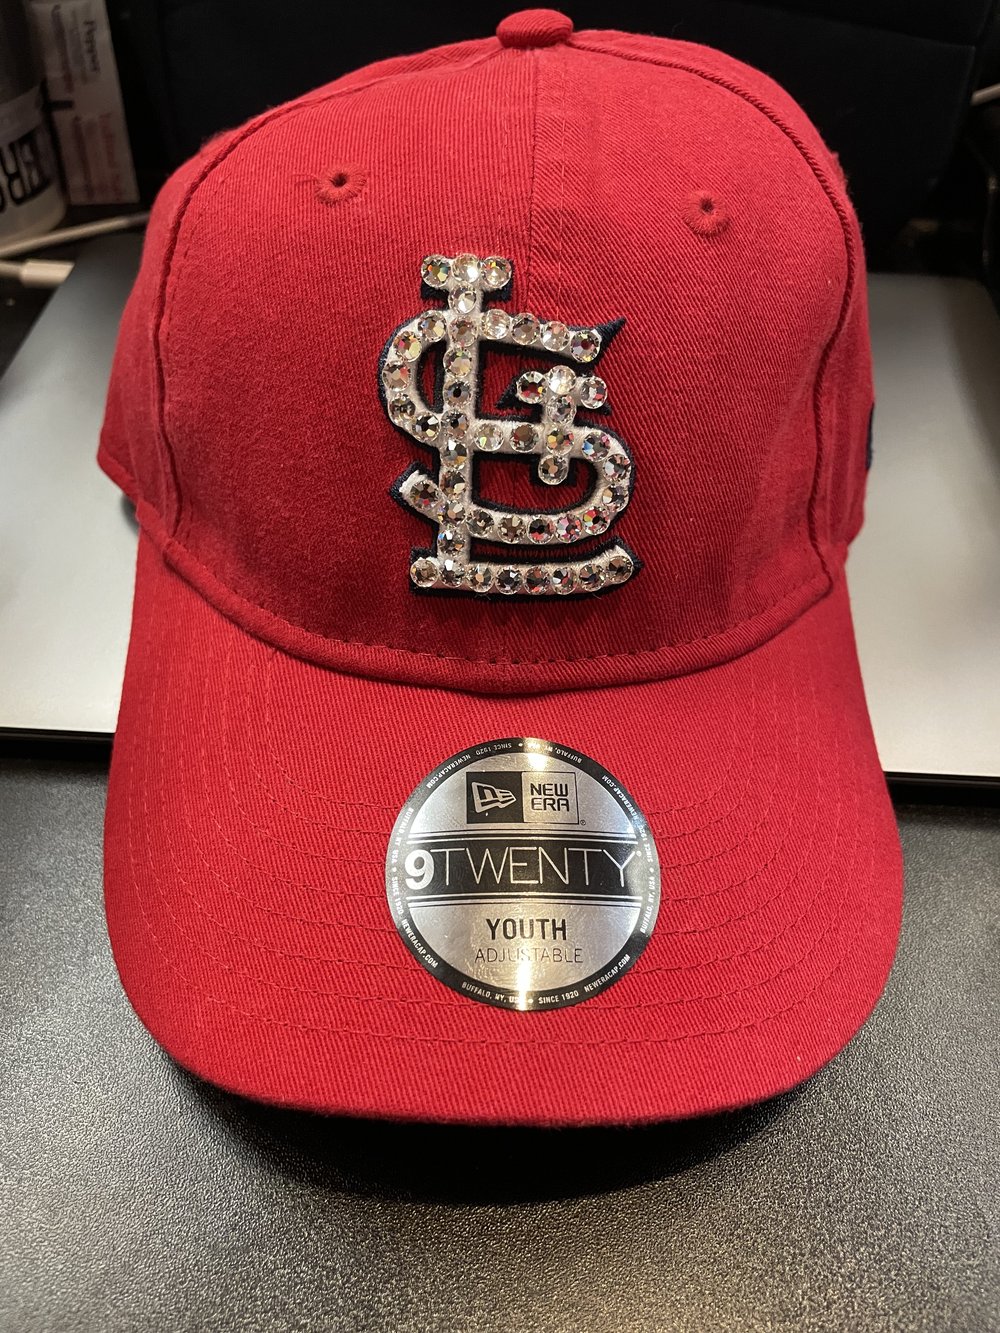 YOUTH adjustable St. louis Cardinals BLINGED ballcap (ages 4-7